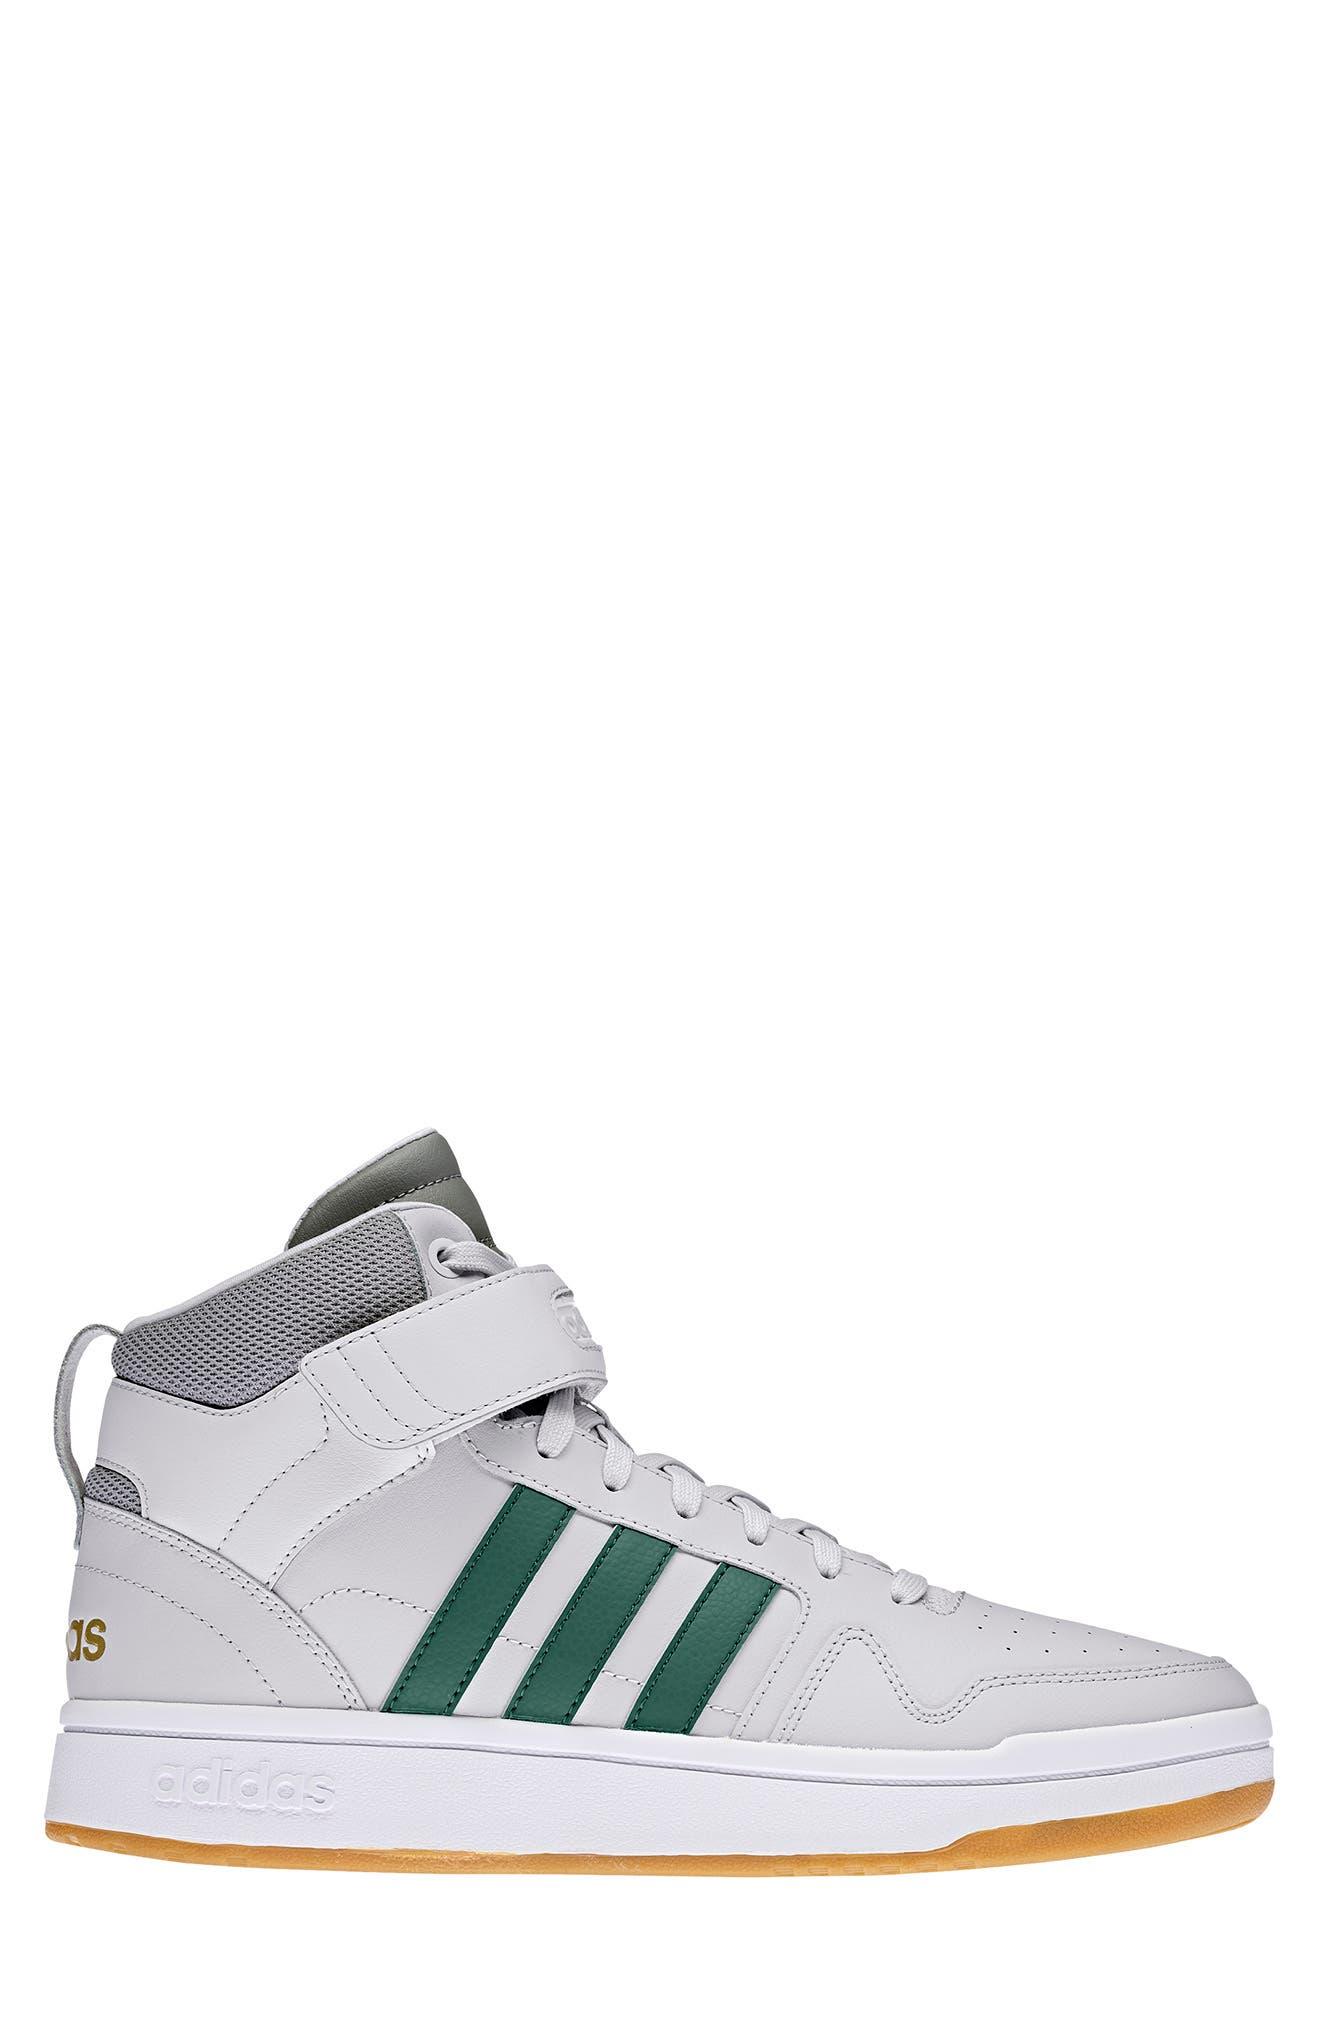 adidas Postmove Mid Sneaker In Grey One/green/white At Nordstrom Rack for  Men | Lyst